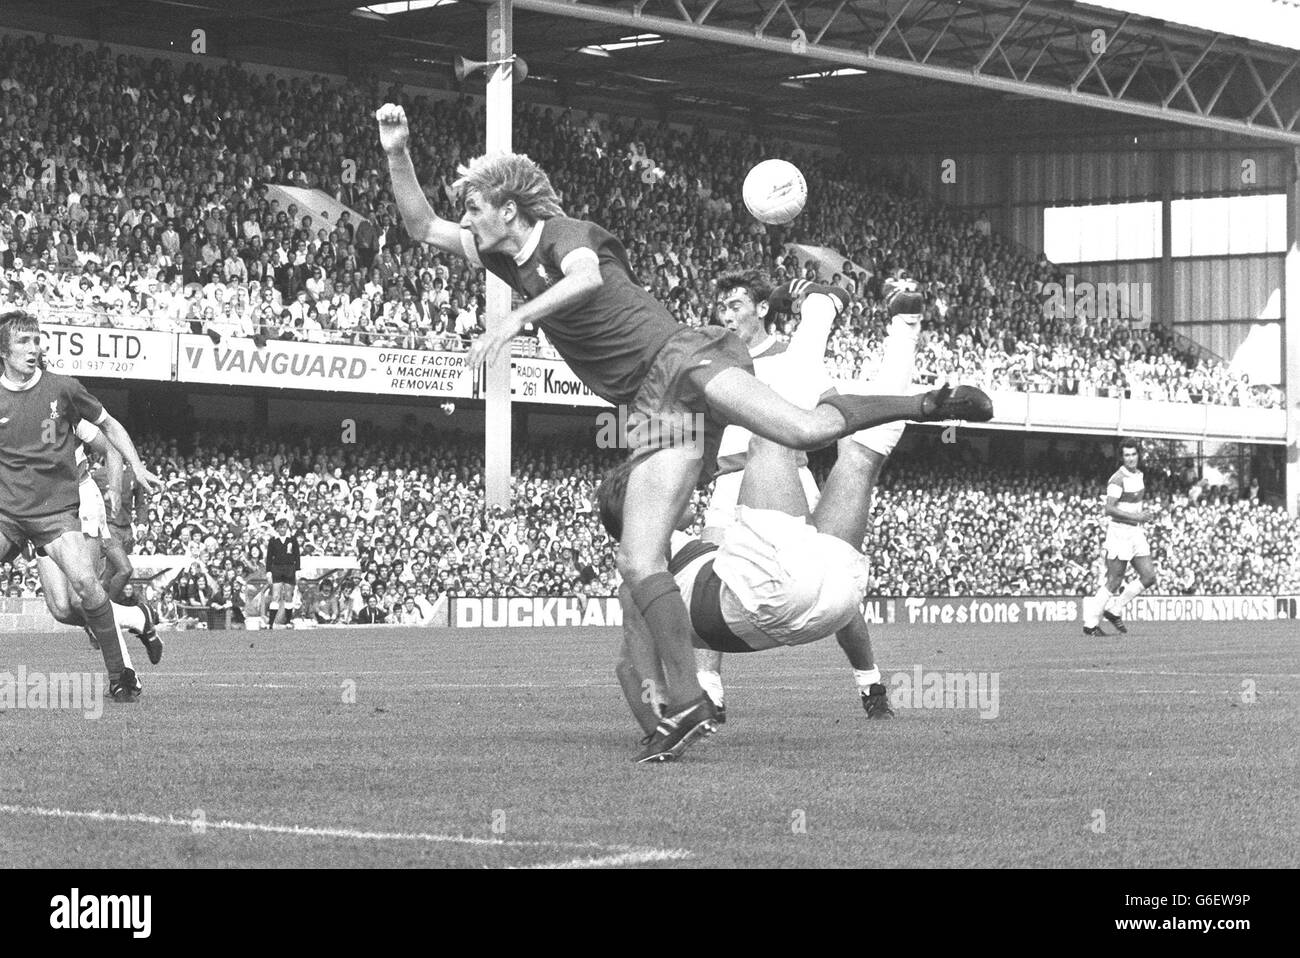 A buttocks view of David Webb of QPR trying an overhead kick in a duel with Phil Thompson (left) of Liverpool, during their Football League Division One game at Rangers Stadium, Shepherds Bush today. Stock Photo